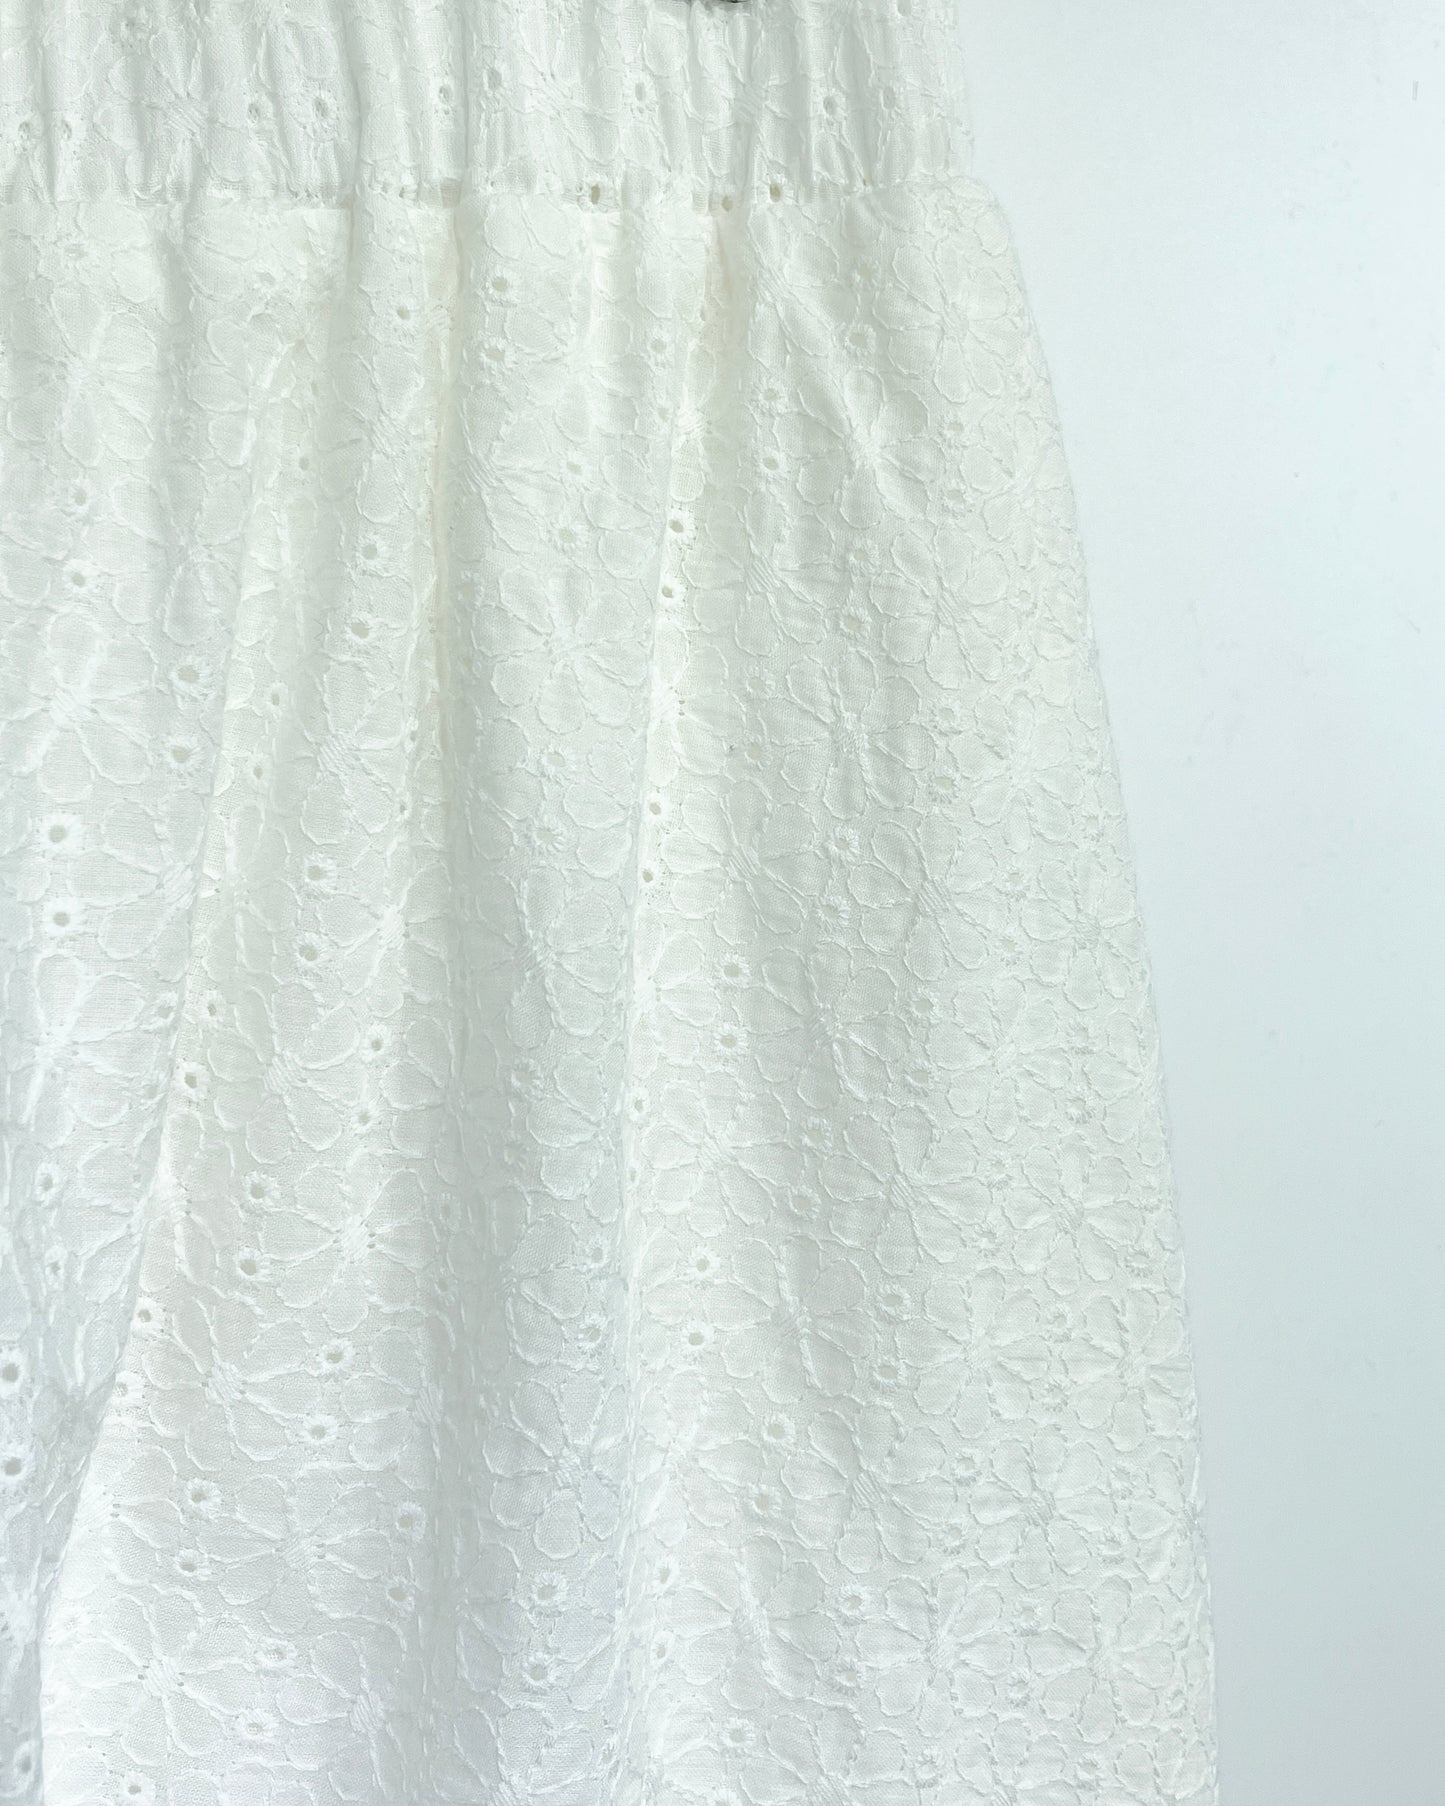 Cotton embroidery skirt